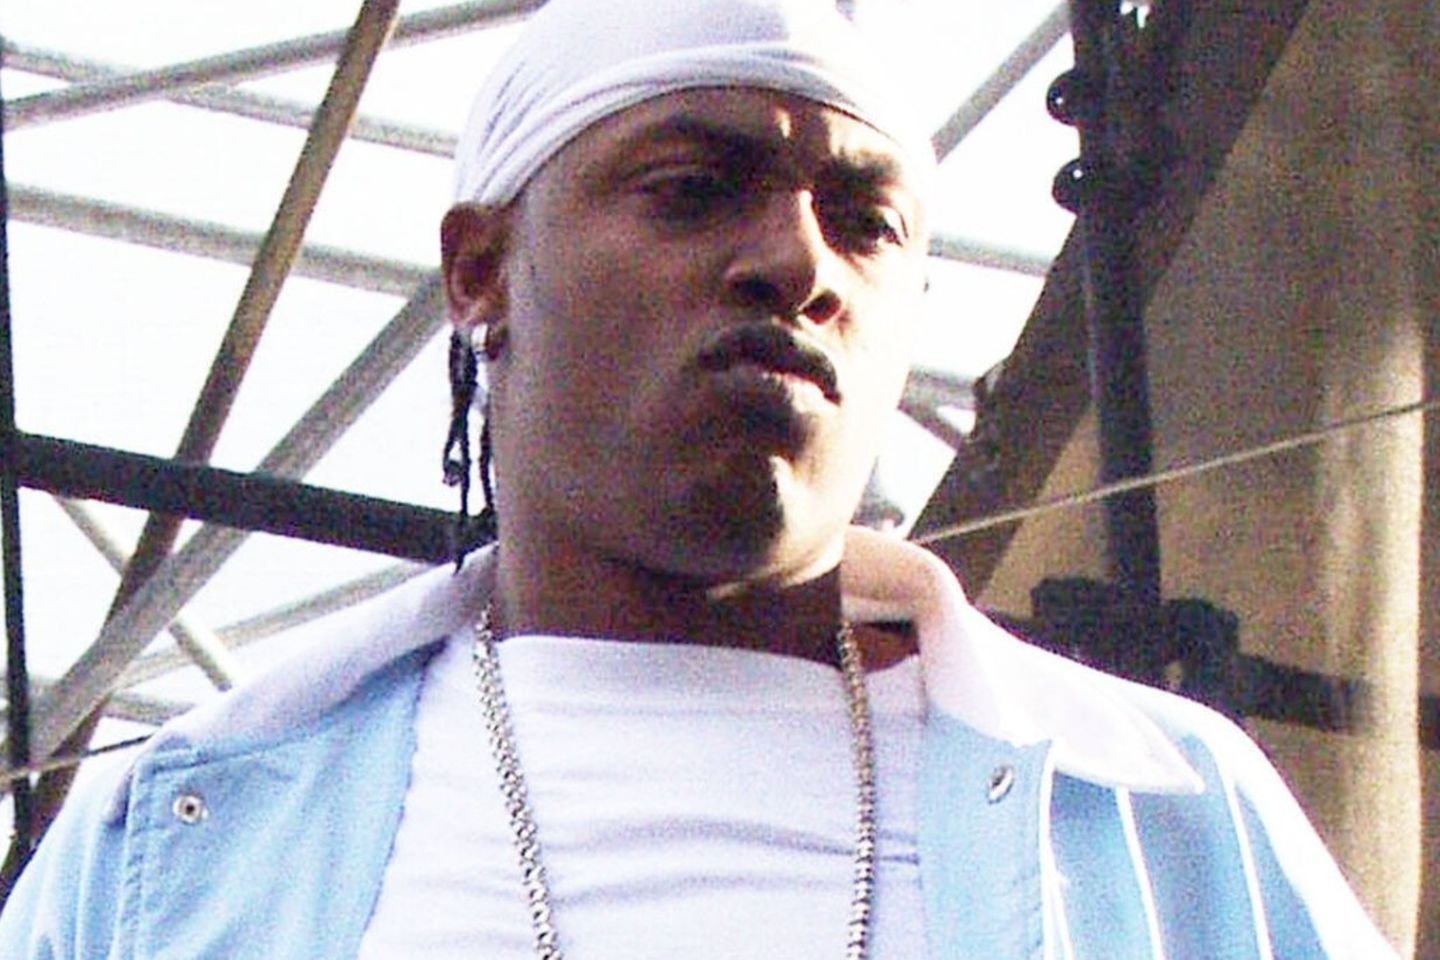 According to media reports, the rapper Mystikal has been accused of rape.